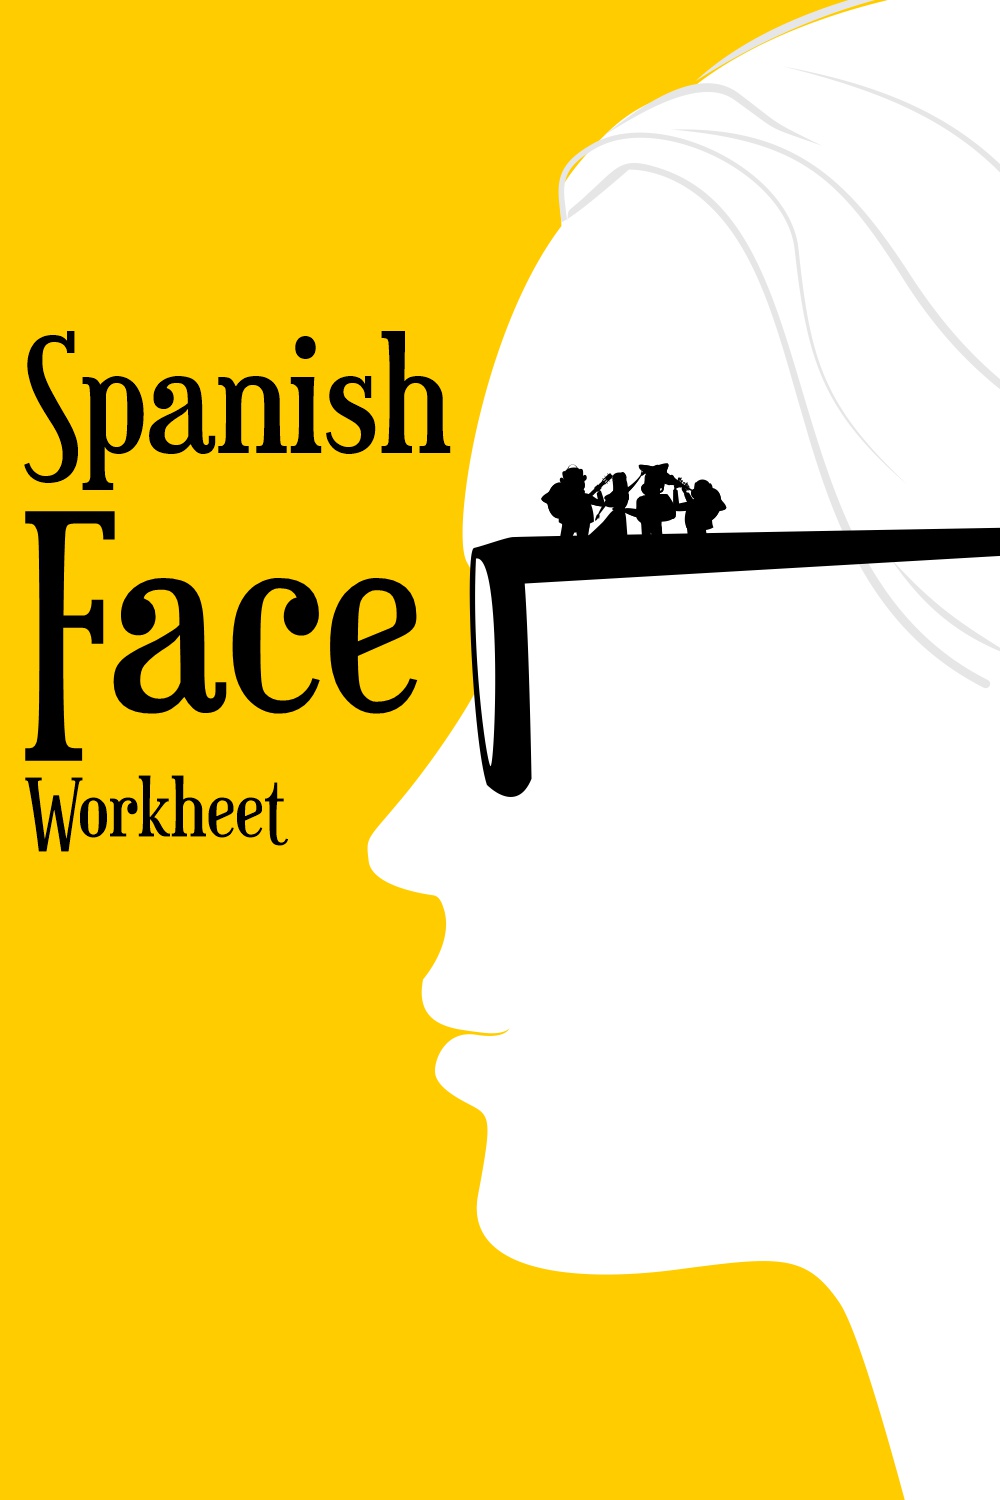 13 Images of Spanish Face Worksheet